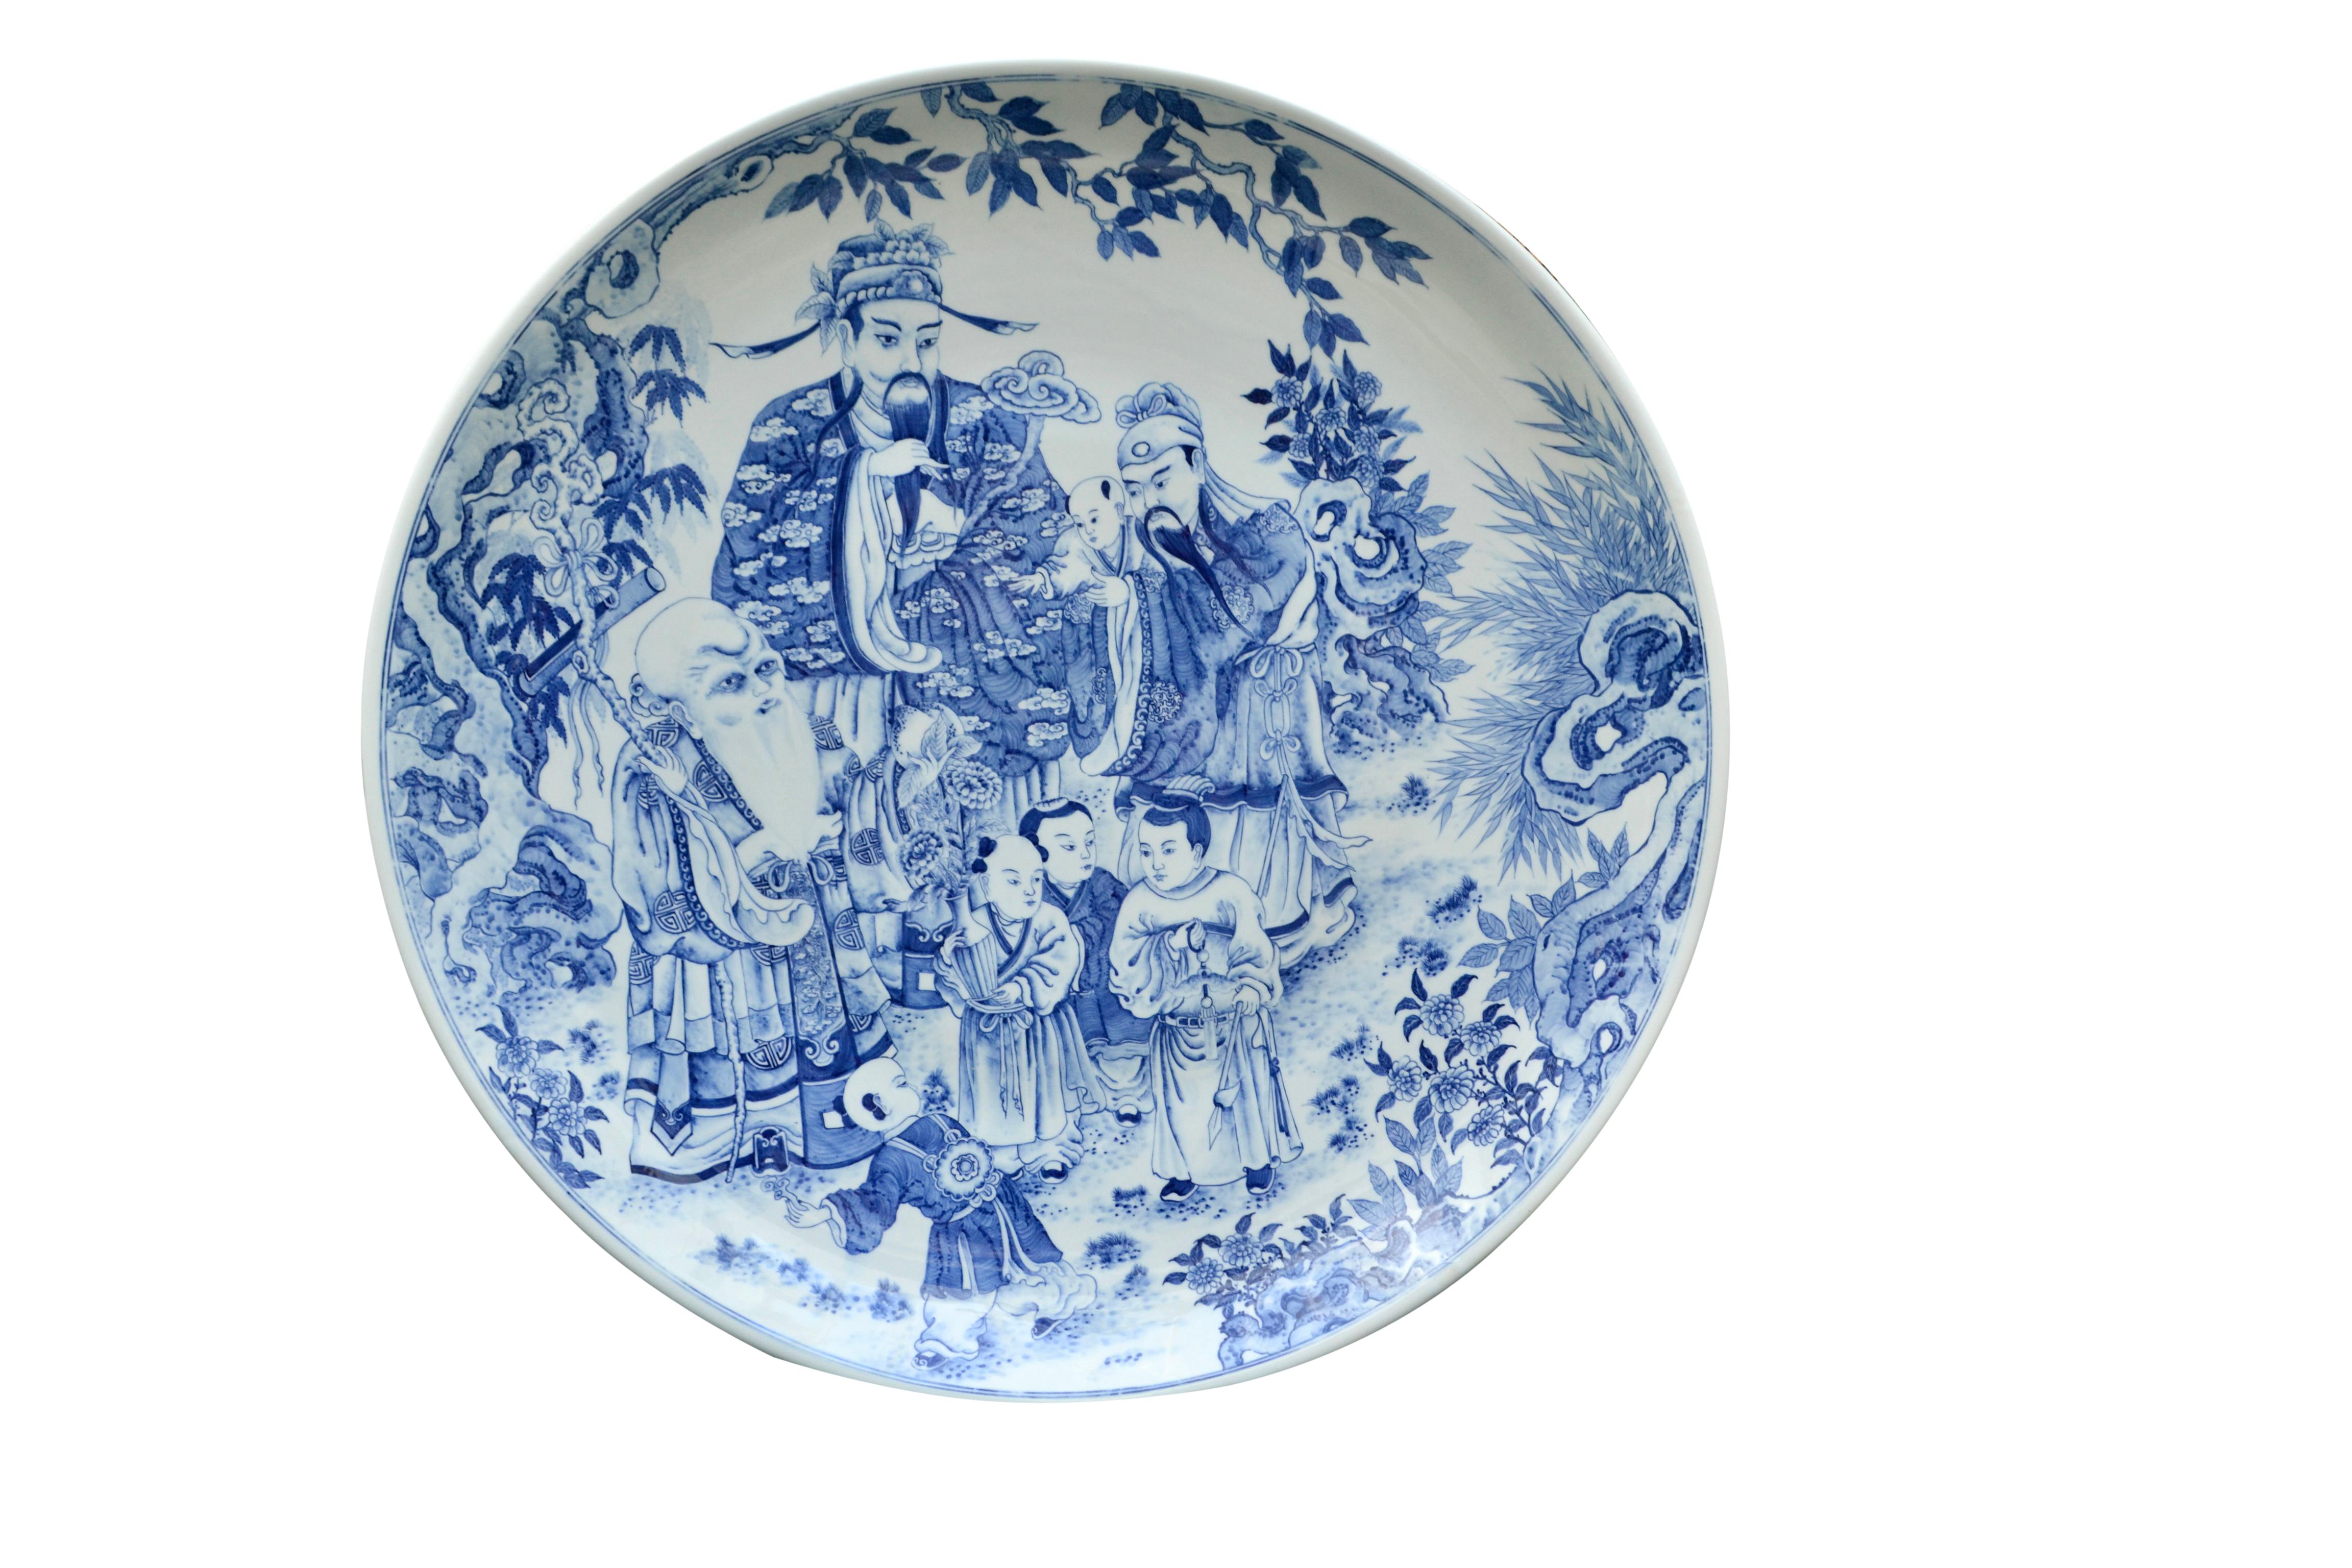 A very large and impressive blue and white Chinese porcelain Charger depicting the Taoist concept of Good Fortune (Fu) Good Stable Income (Lu) and Long Life (Shou). Fu is on the right holding his grand child, Lu is i the middle and the old man on